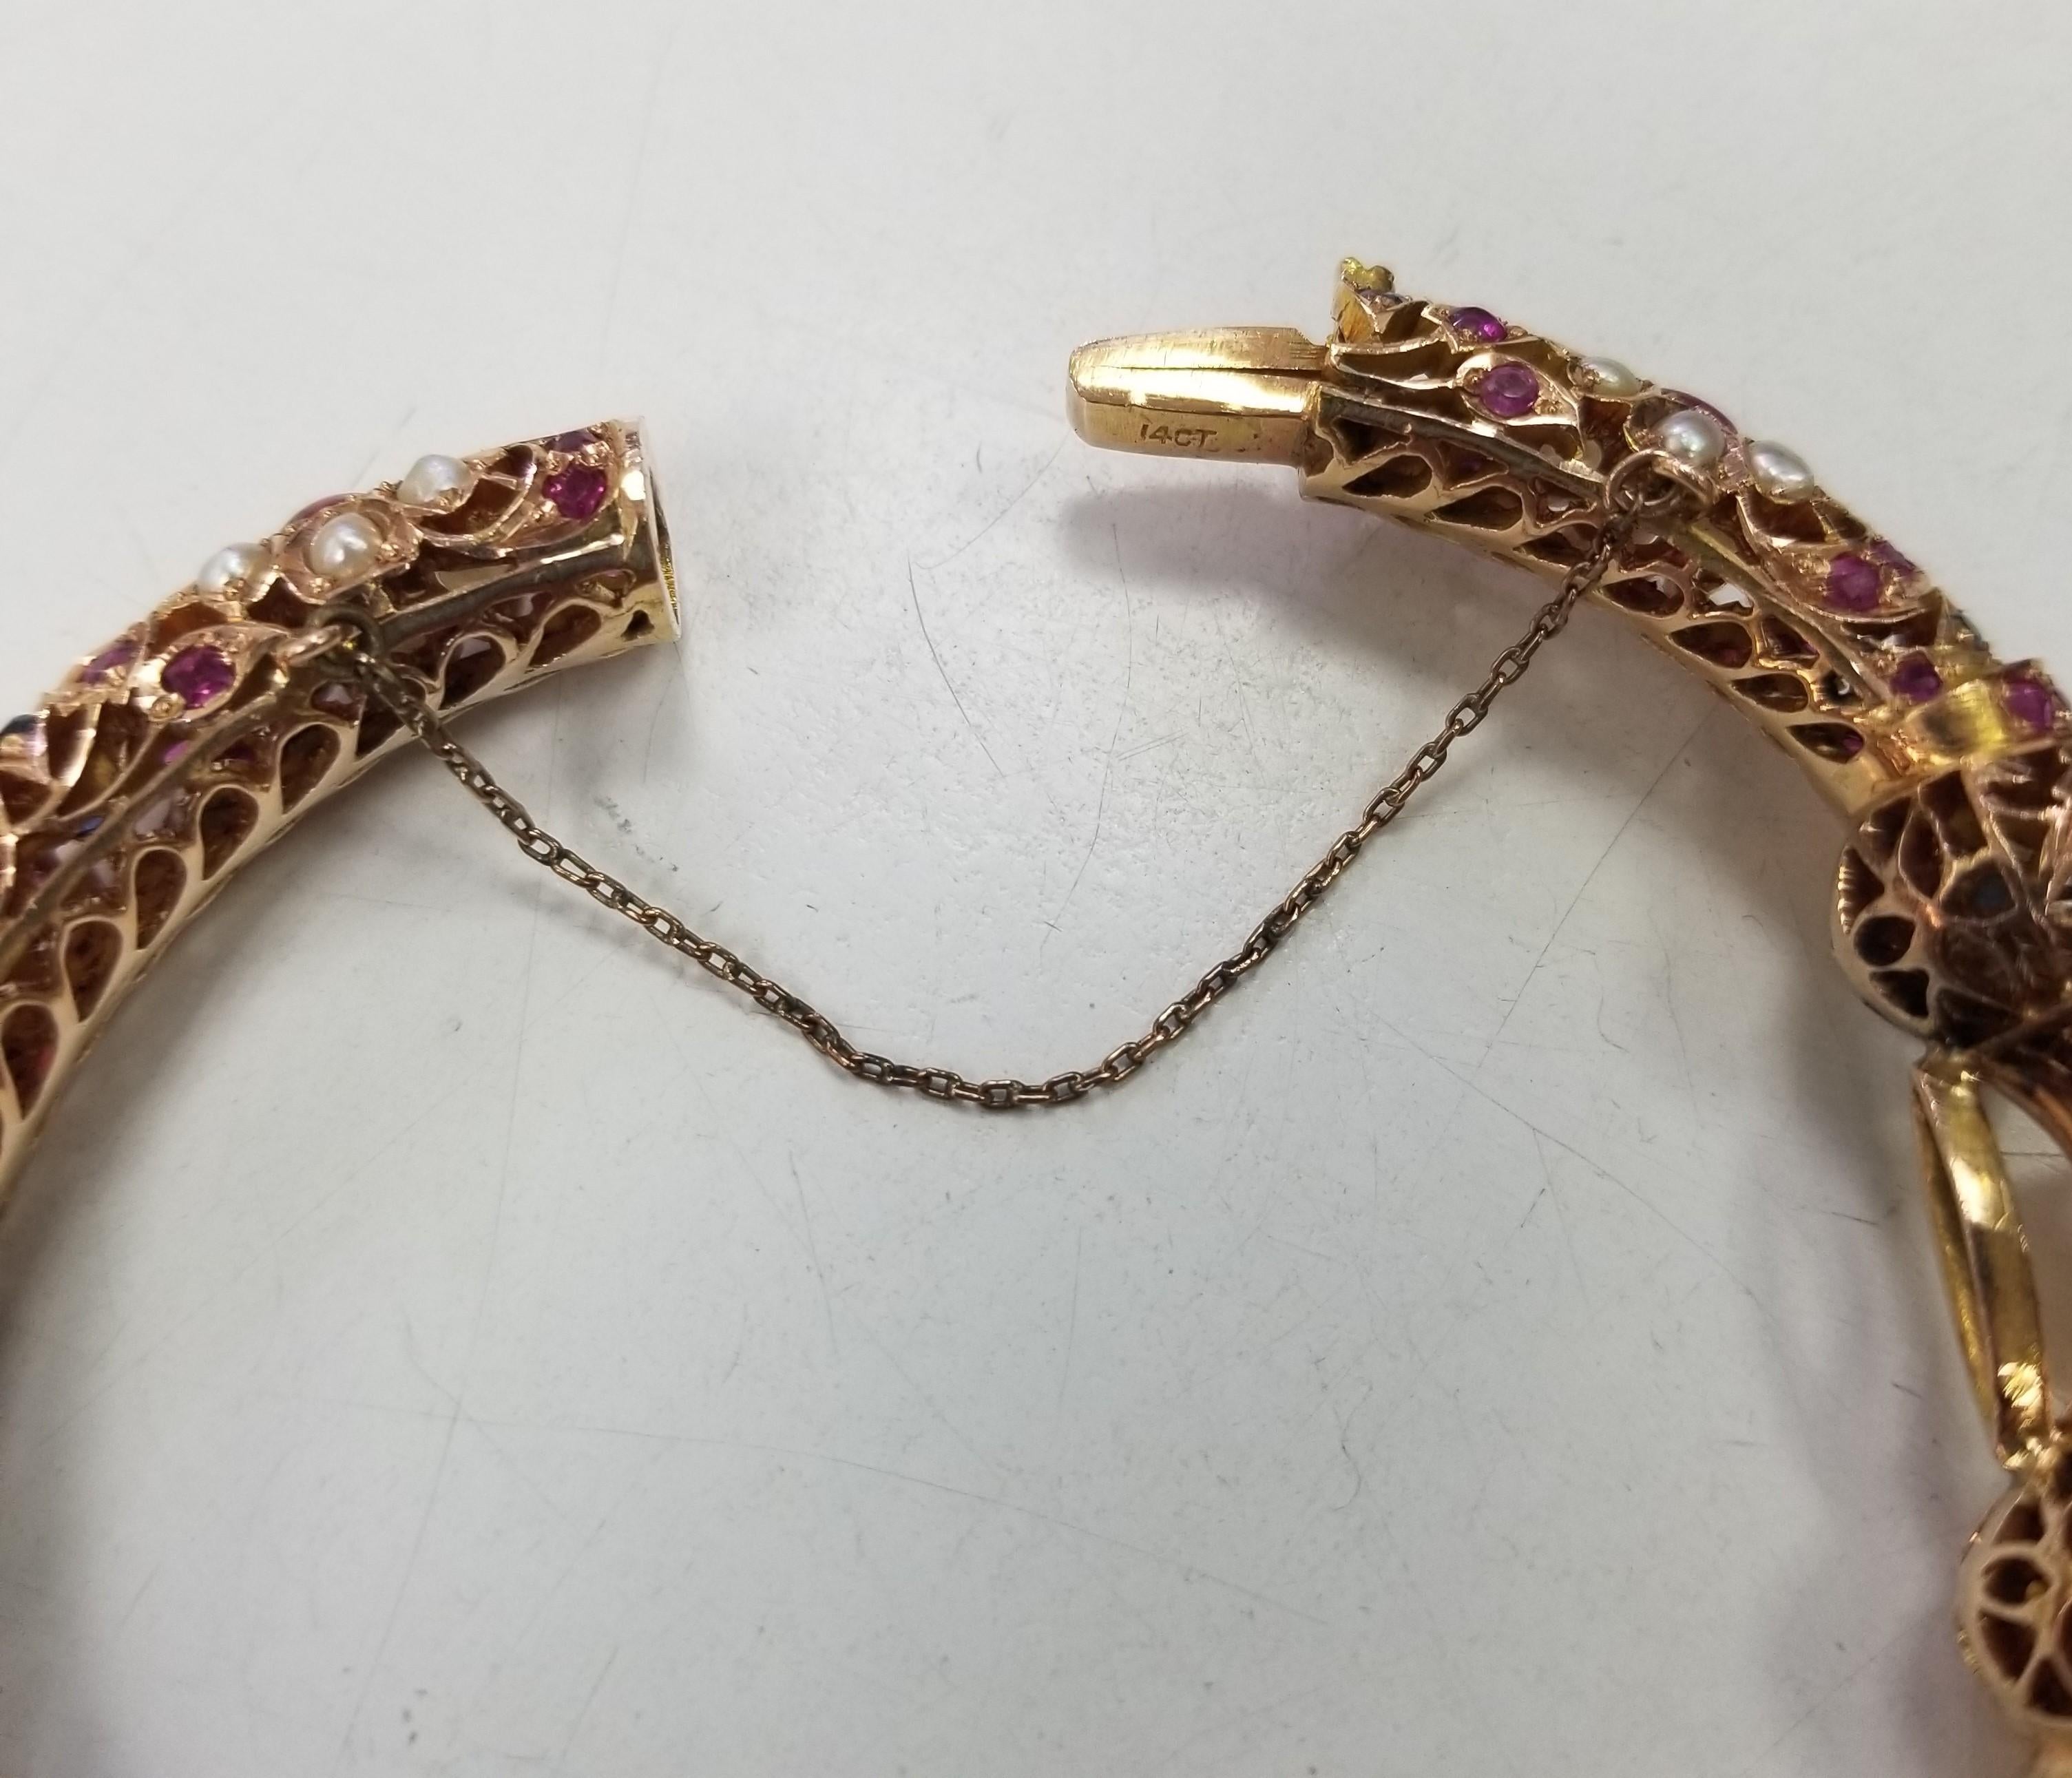 Vintage 14 Karat Yellow Gold Ruby, Sapphire and Pearl Bangle form the 